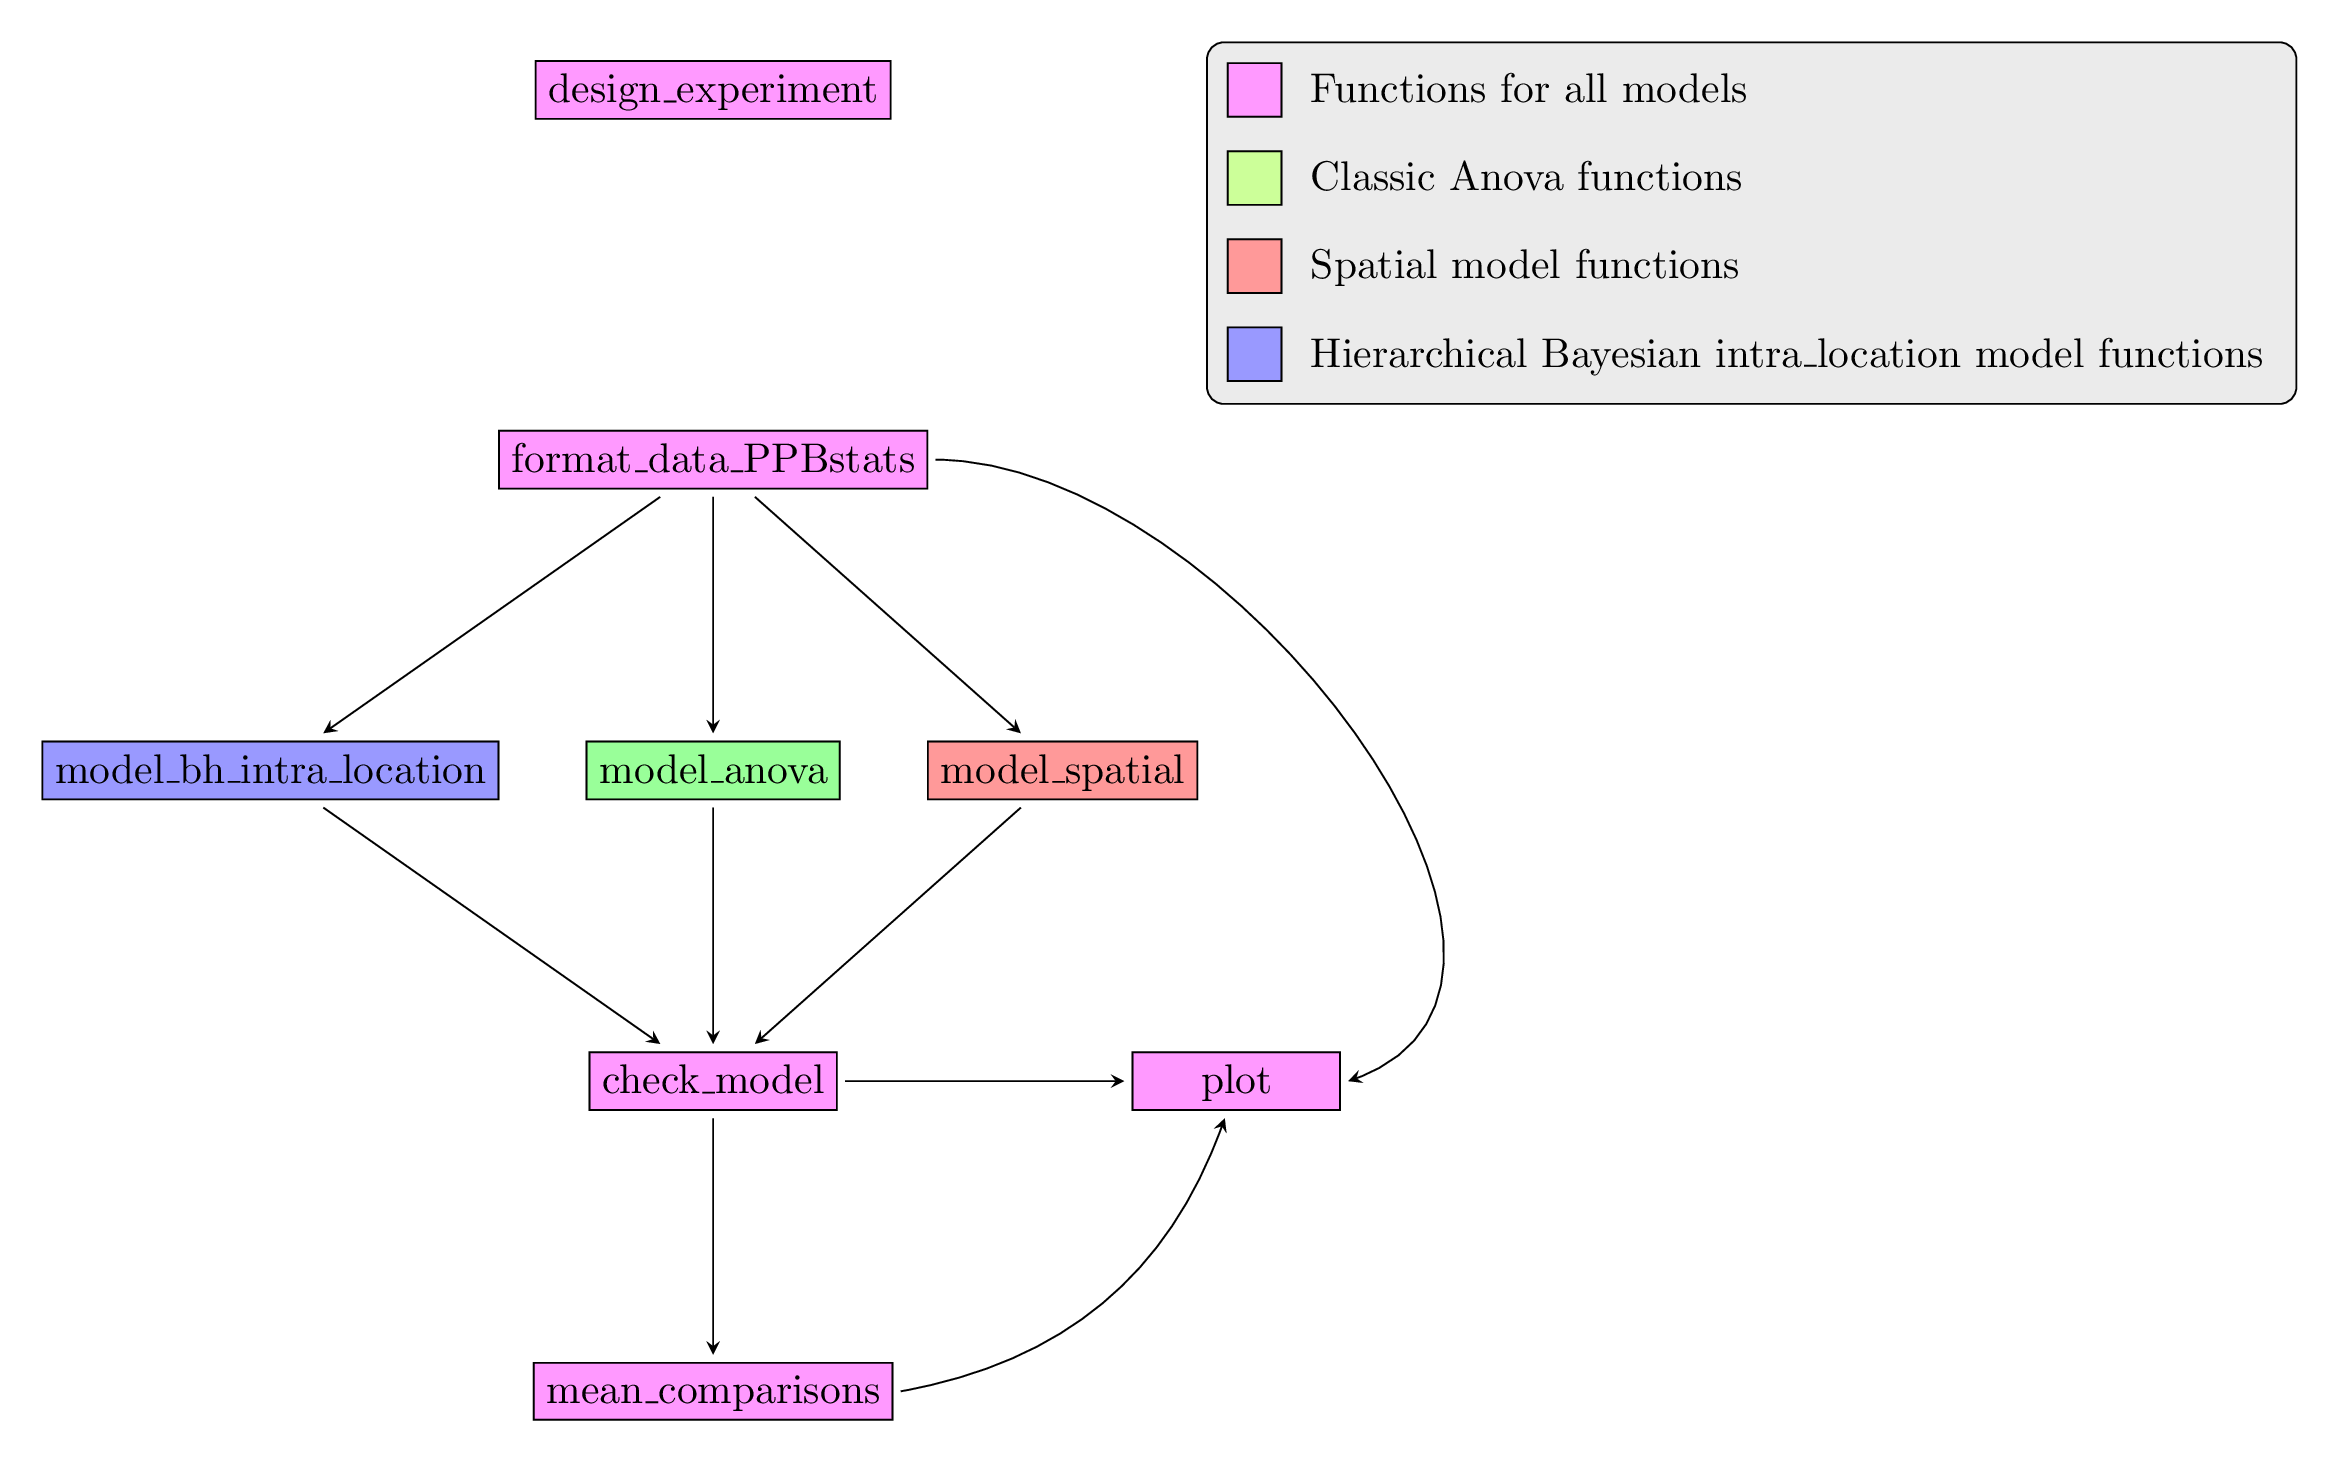 Main functions used in the workflow of family 1.